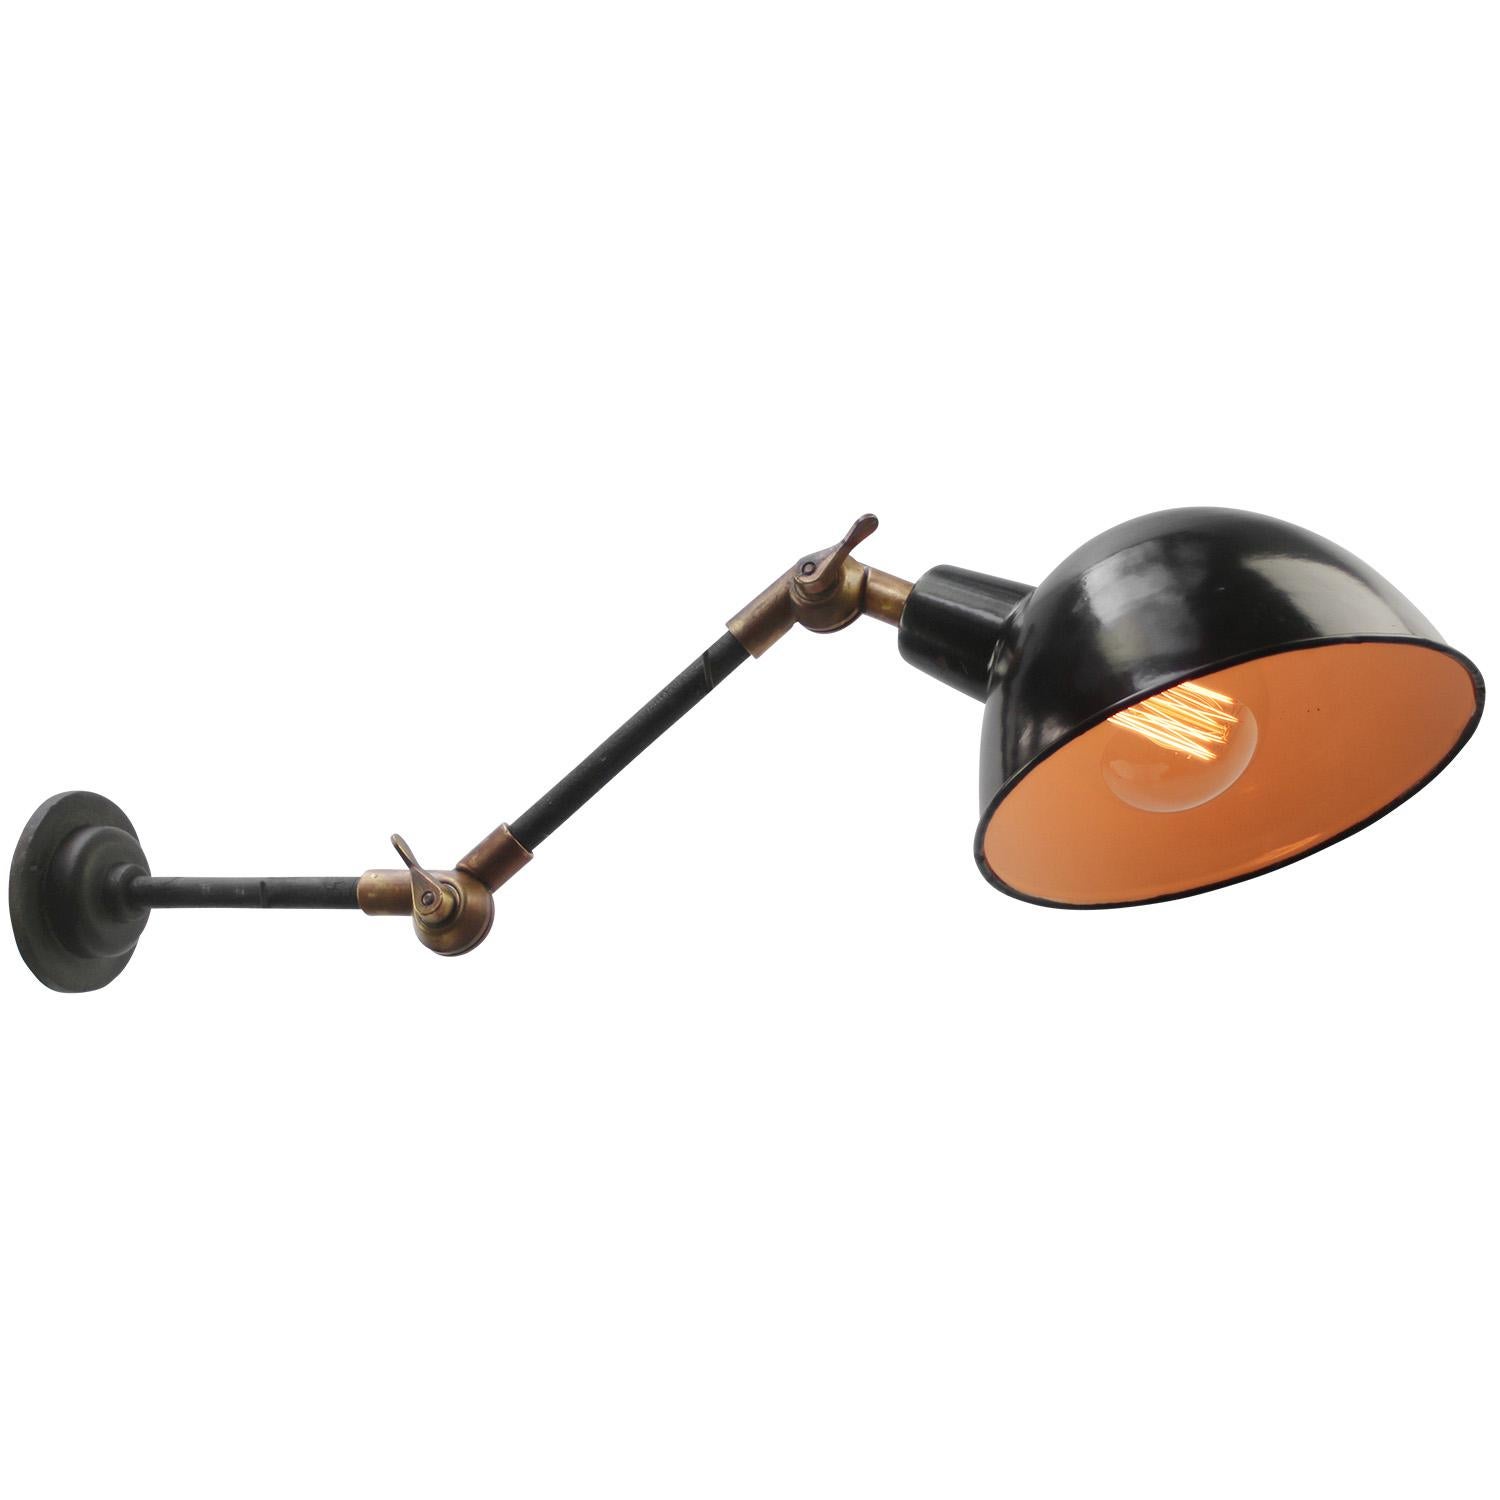 1950s Black enamel, cast iron industrial 2 arm machinist work light
adjustable in height
width as pictures: 70 cm

Diameter Wall plate 10,5 cm / 4 inches

Priced per individual item. All lamps have been made suitable by international standards for